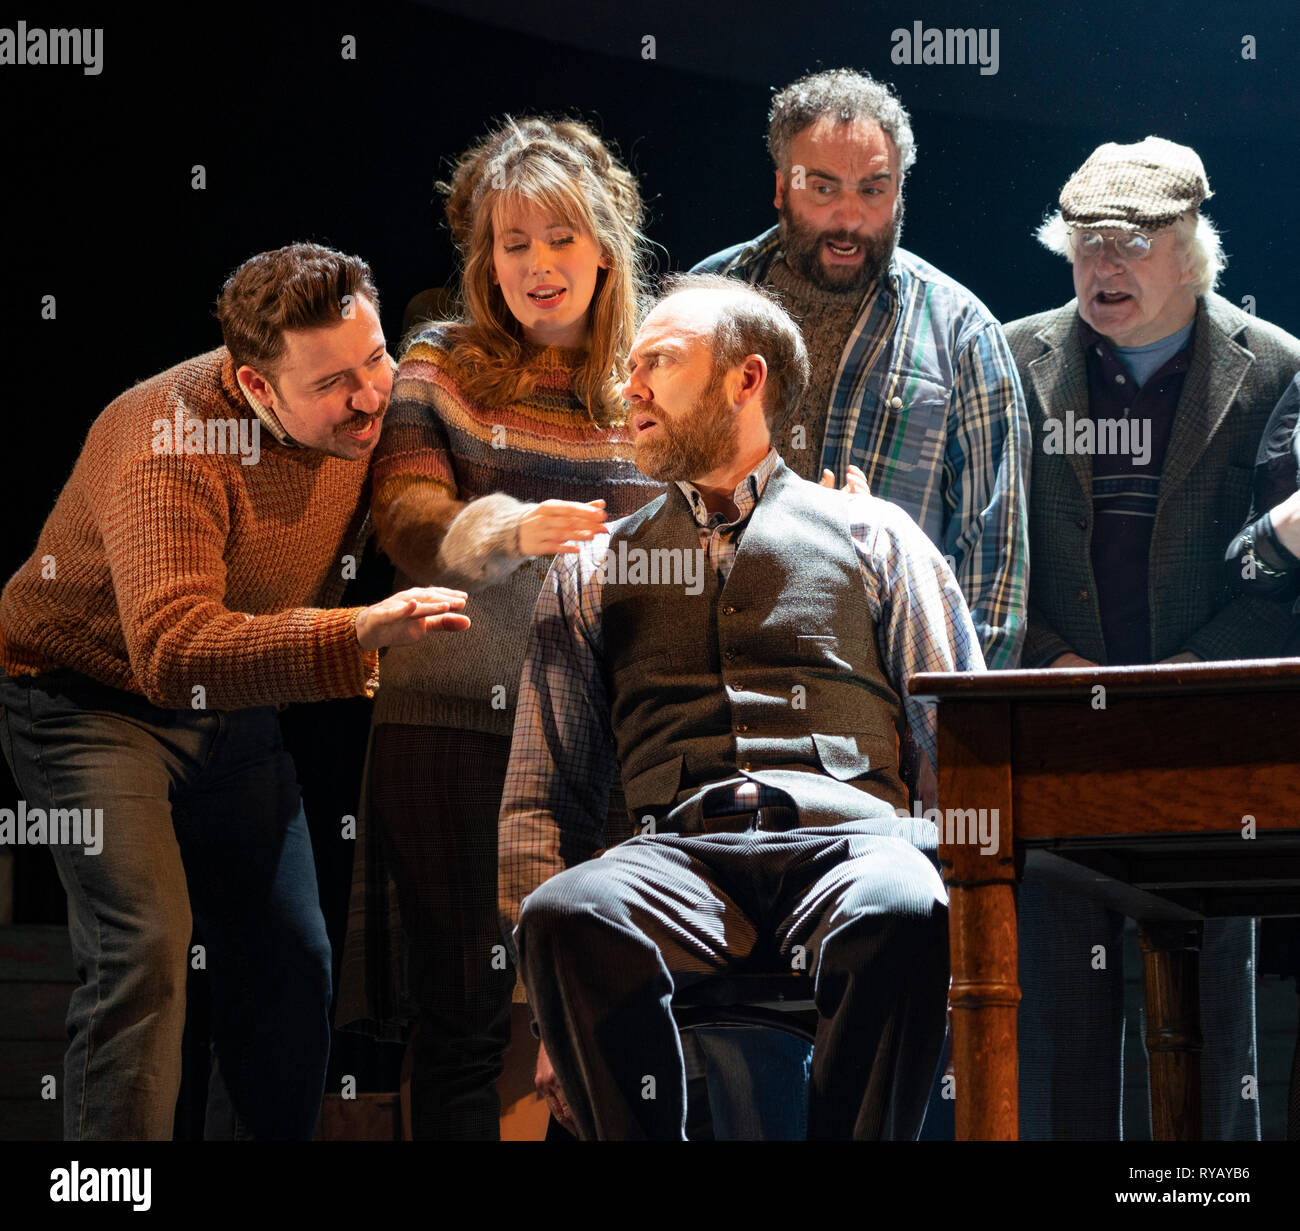 Edinburgh, Scotland, UK. 13th Mar, 2019. Photo call of World Premiere of Local Hero stage adaptation at Royal Lyceum Theatre in Edinburgh. Musical adaptation written by Bill Forsyth and David Grieg with new music by Mark Knopfler, directed by John Crowley. Credit: Iain Masterton/Alamy Live News Stock Photo